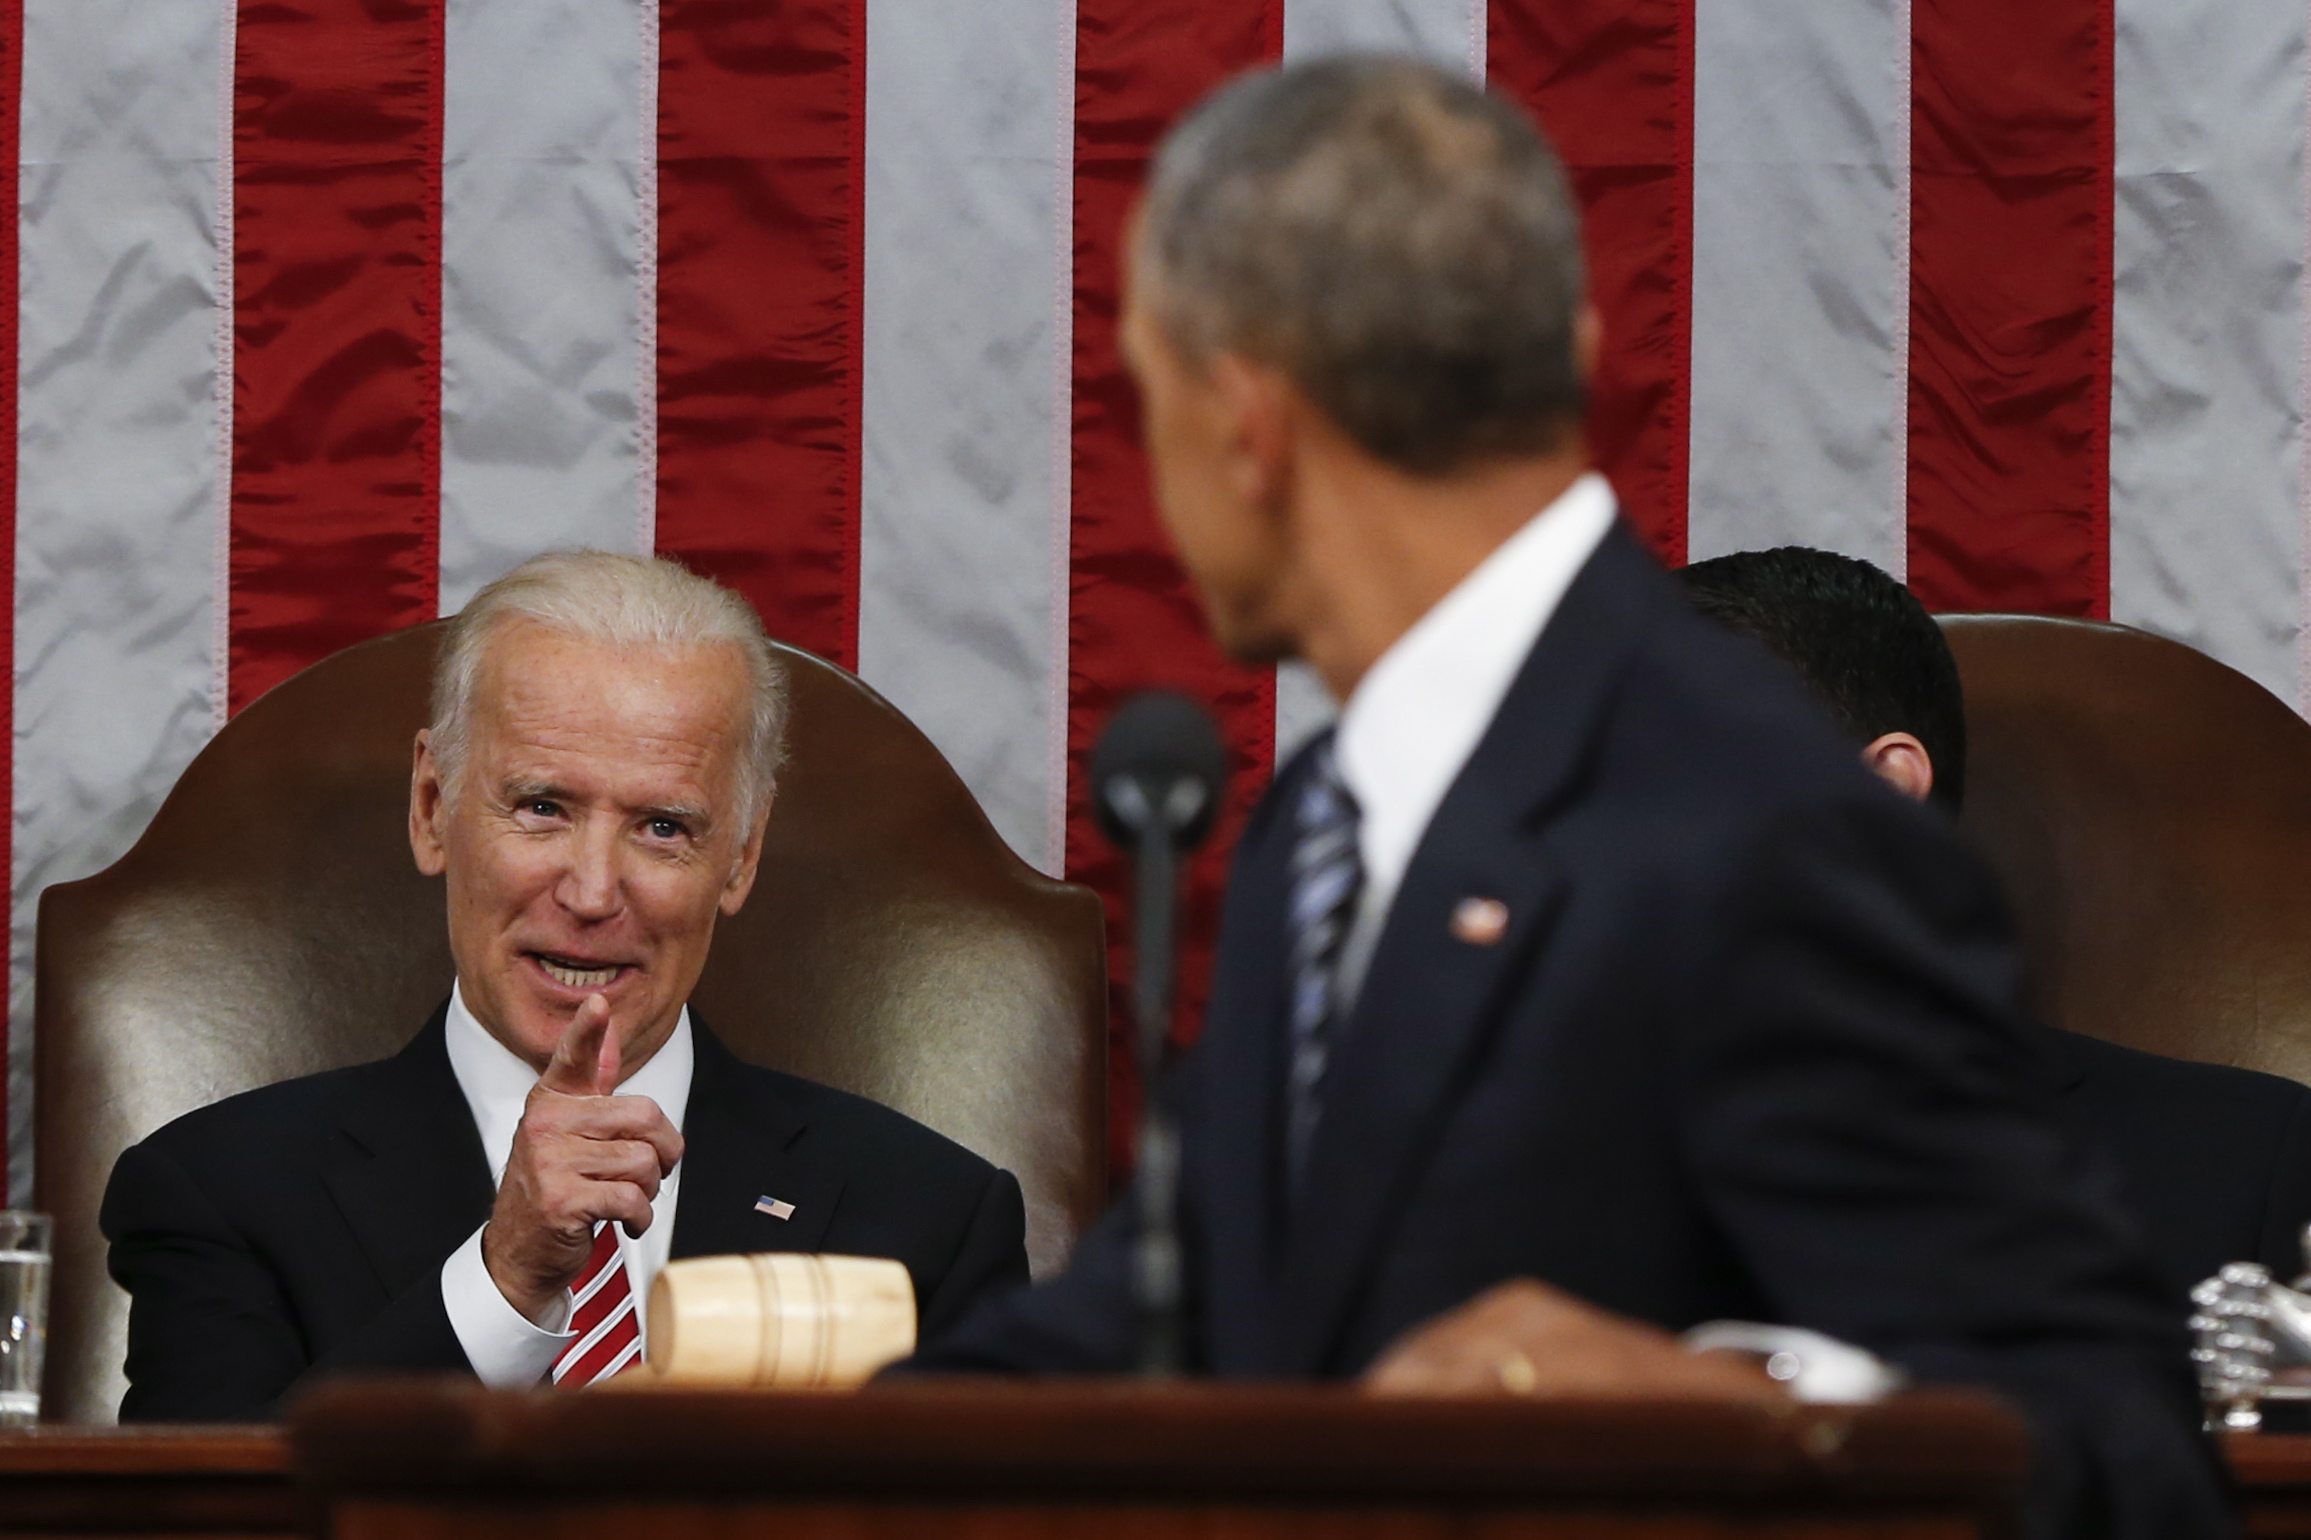 Vice President Joe Biden points at President Barack Obama during the State of the Union address to a joint session of Congress on Capitol Hill in Washington on Tuesday.